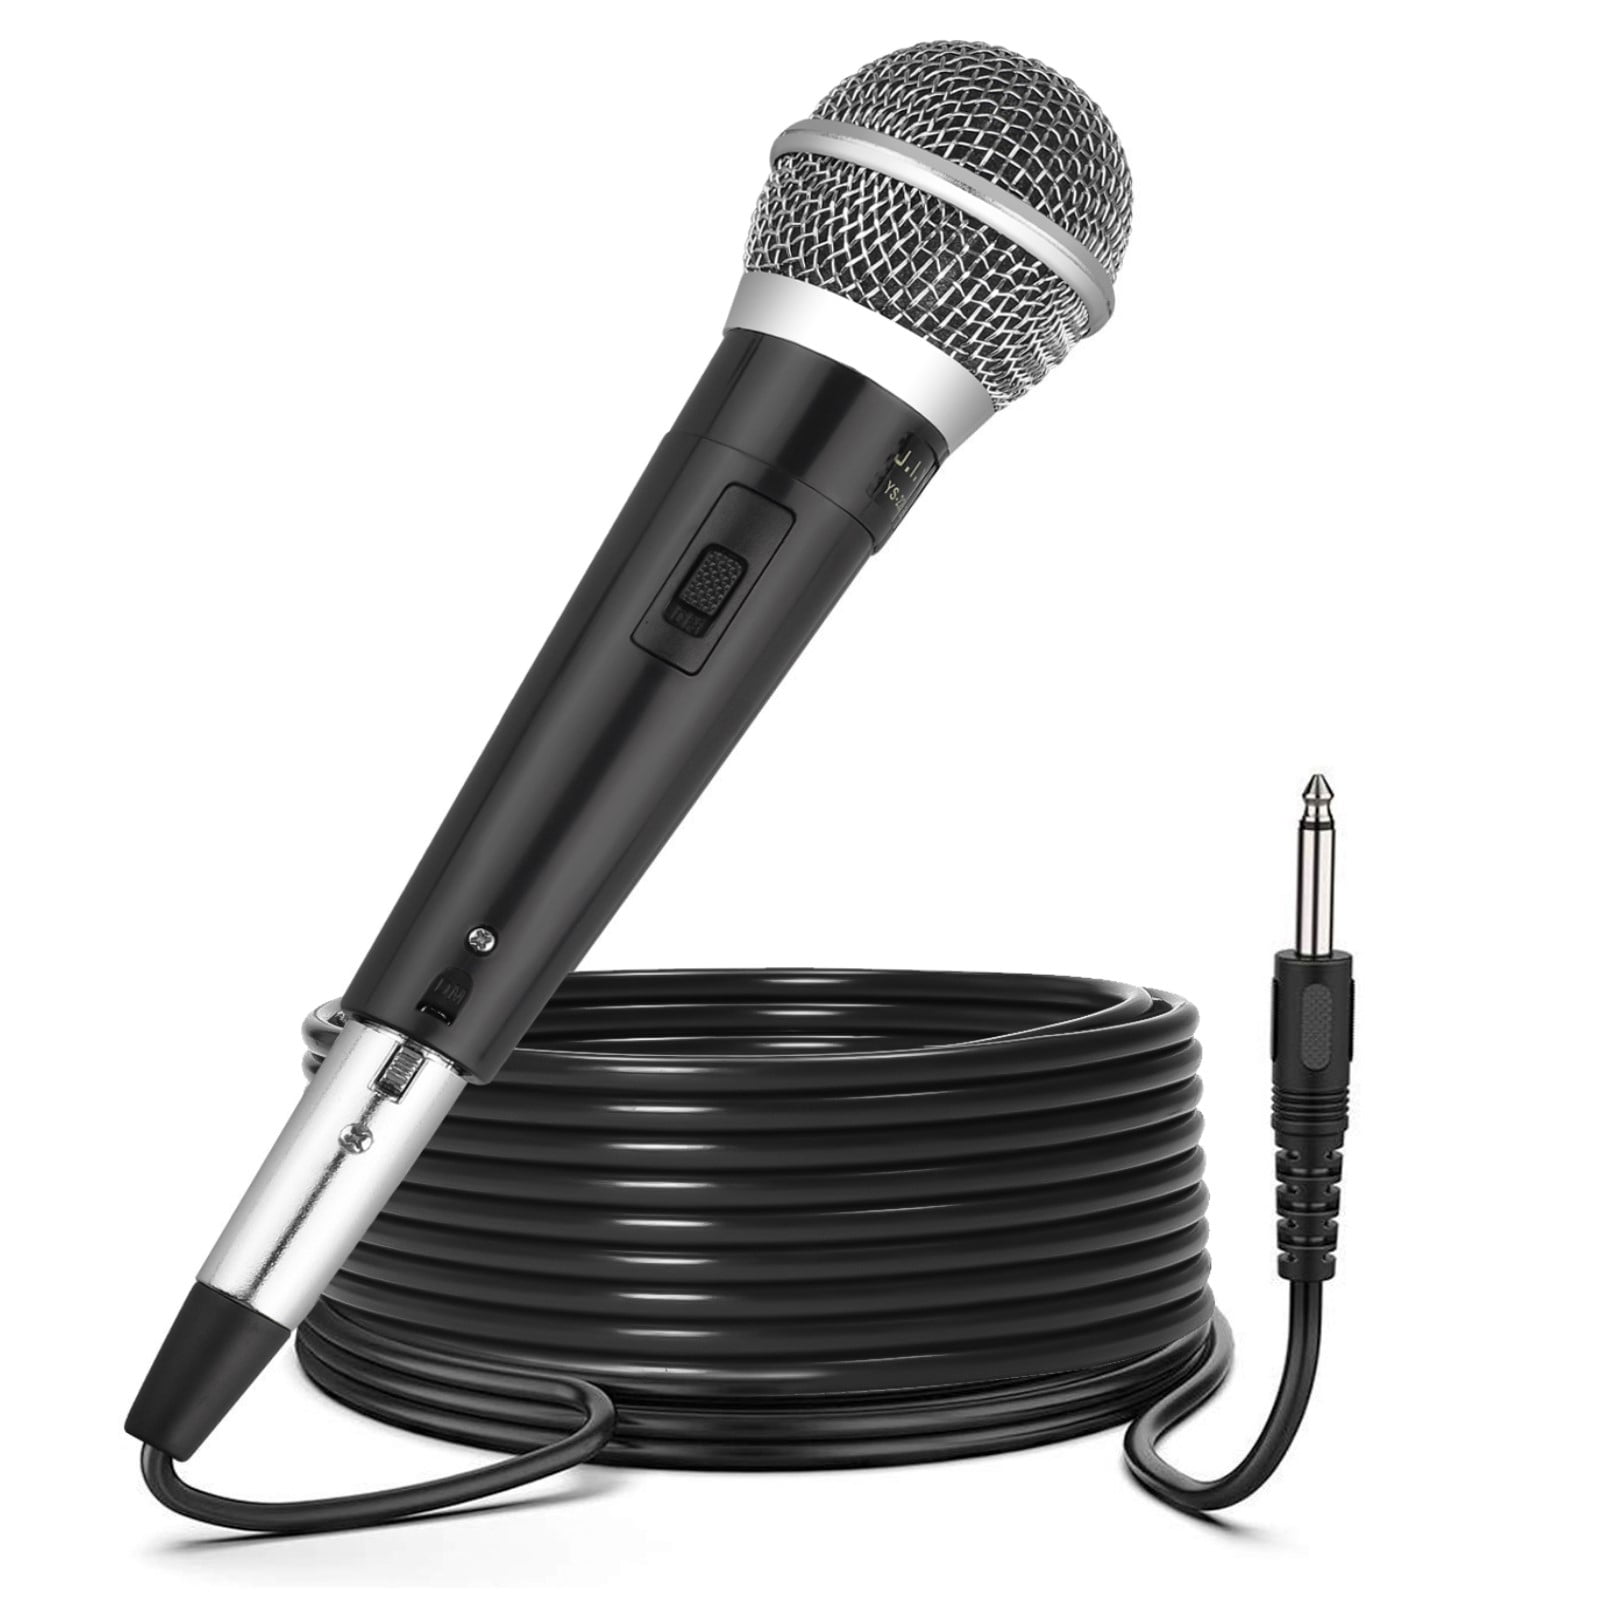 Karaoke Wired Dynamic Karaoke Microphone Wedding Speech Unidirectional Vocal Handheld Microphone with 10ft Cord with On/Off Switch for Stage 